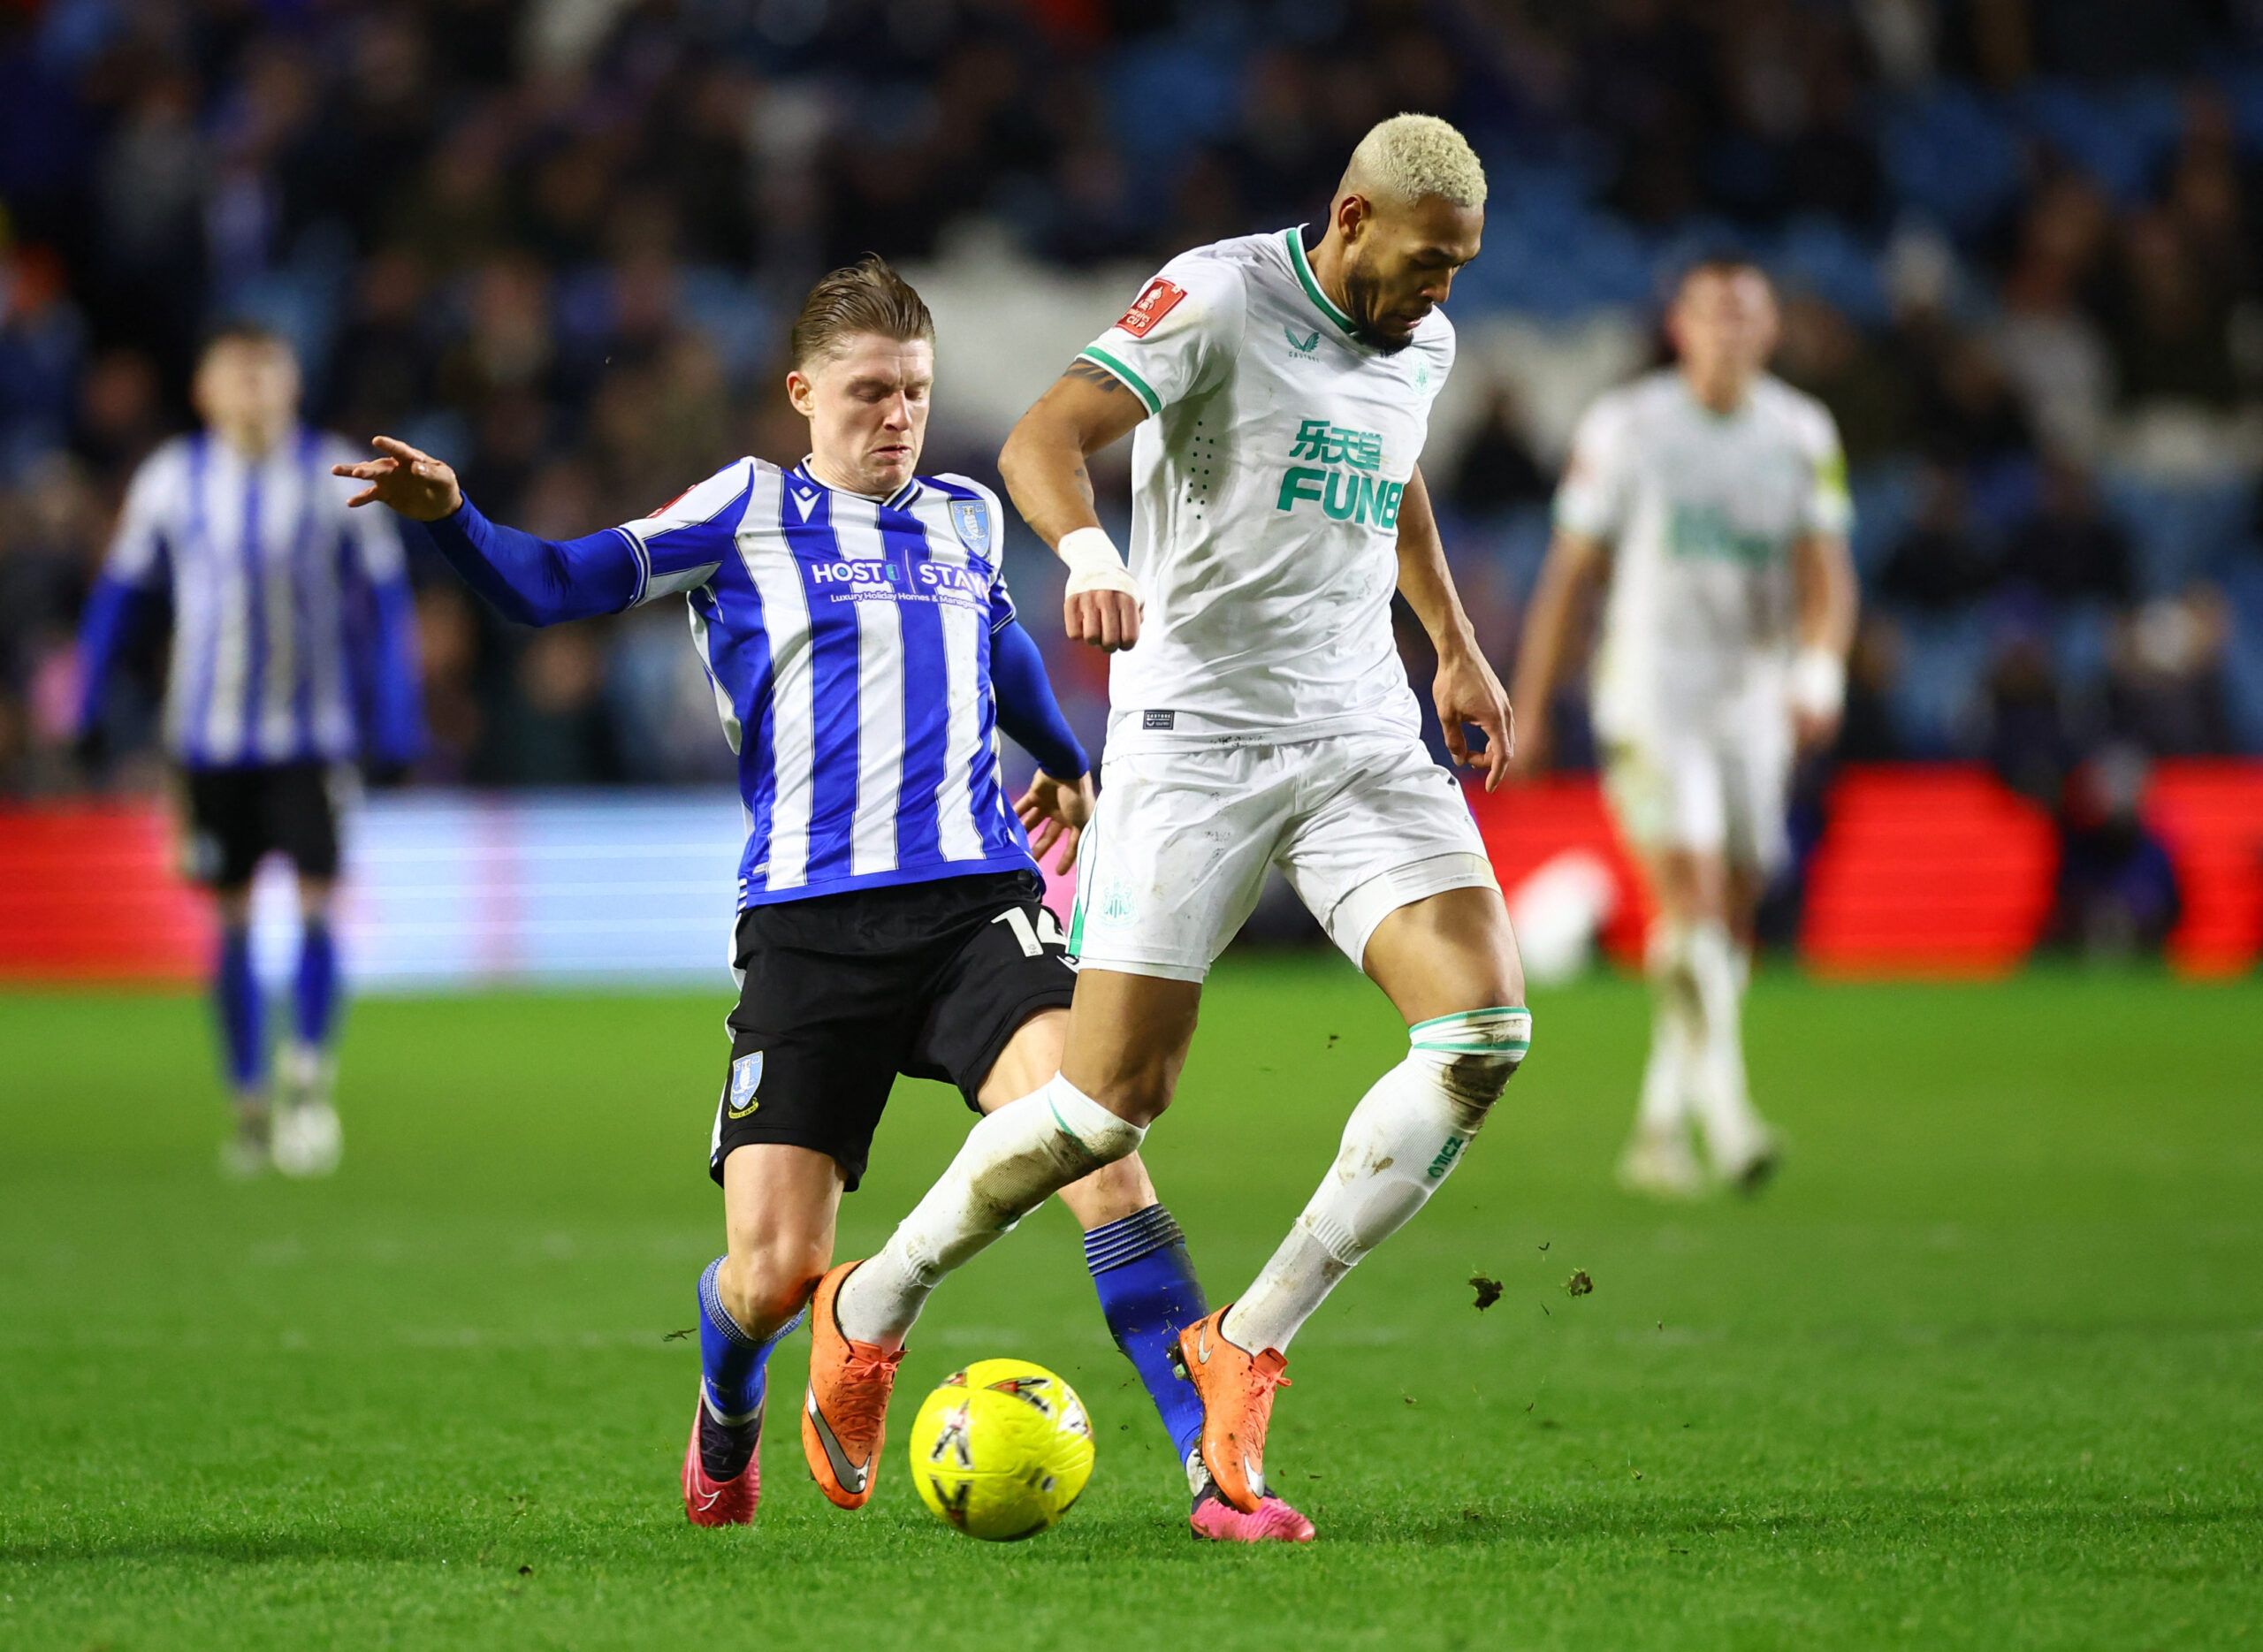 Soccer Football - FA Cup Third Round - Sheffield Wednesday v Newcastle United - Hillsborough Stadium, Sheffield, Britain - January 7, 2023 Newcastle United's Joelinton in action with Sheffield Wednesday's George Byers REUTERS/Carl Recine